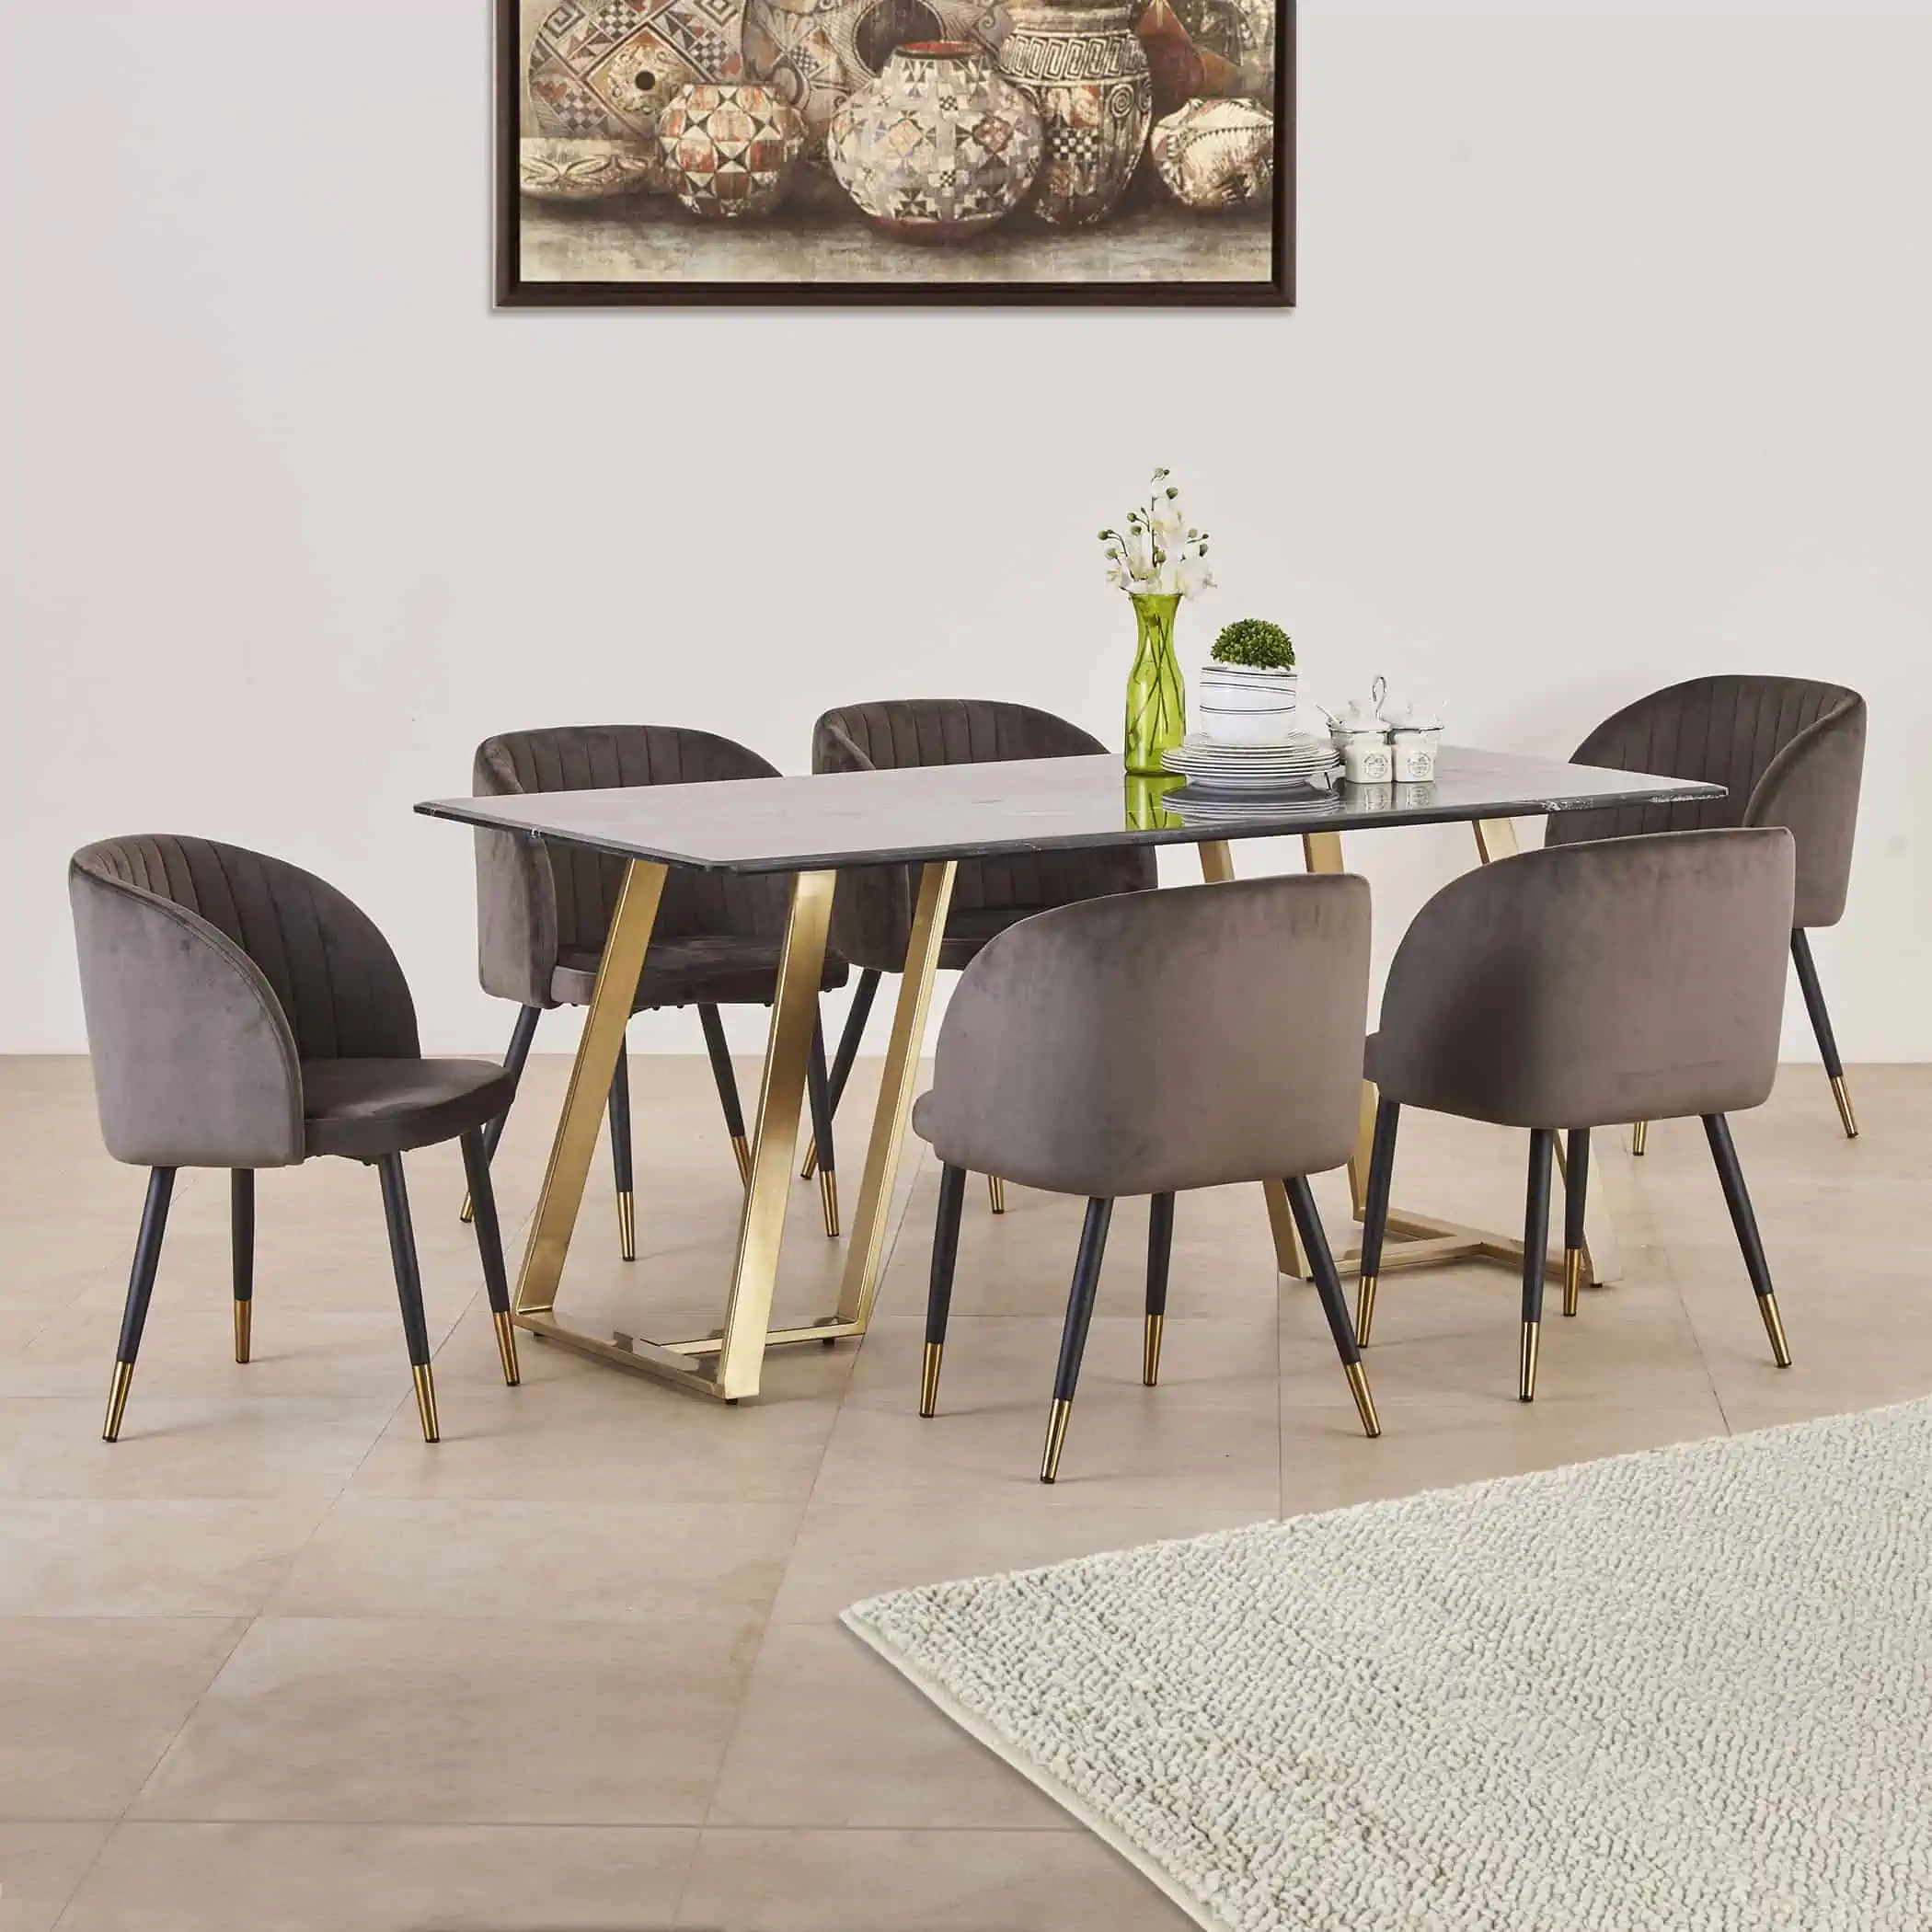 Black marble top rectangle 6 seater dining table with brown chairs